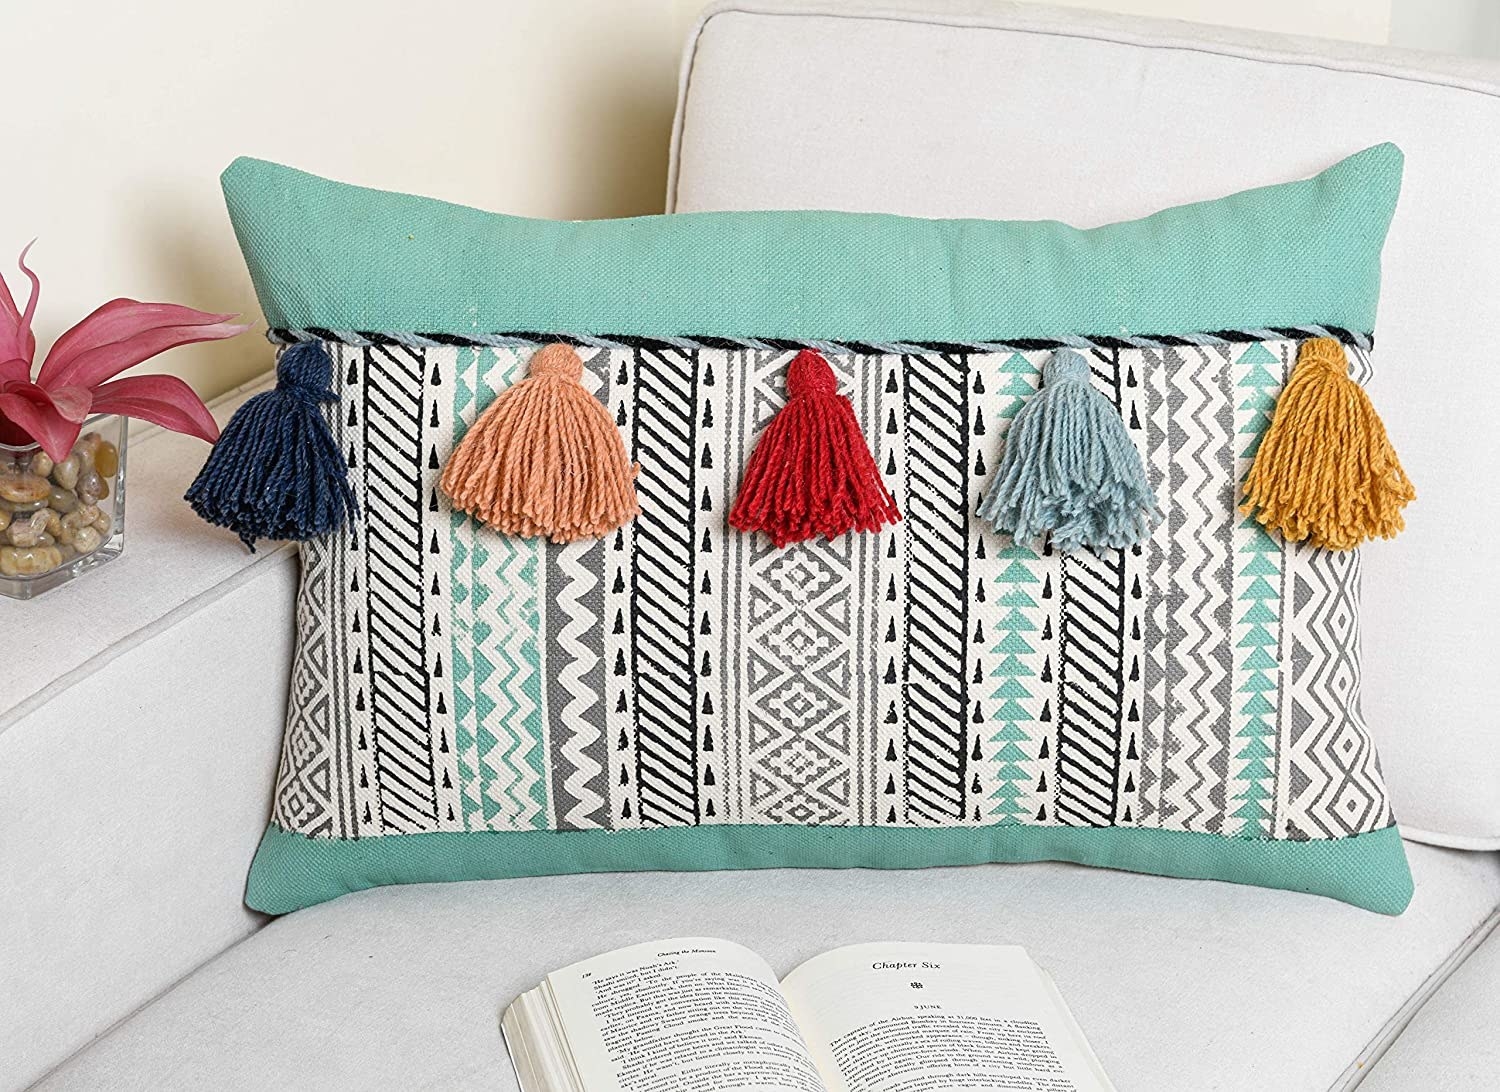 A turquoise cushion cover with colourful tassels on it